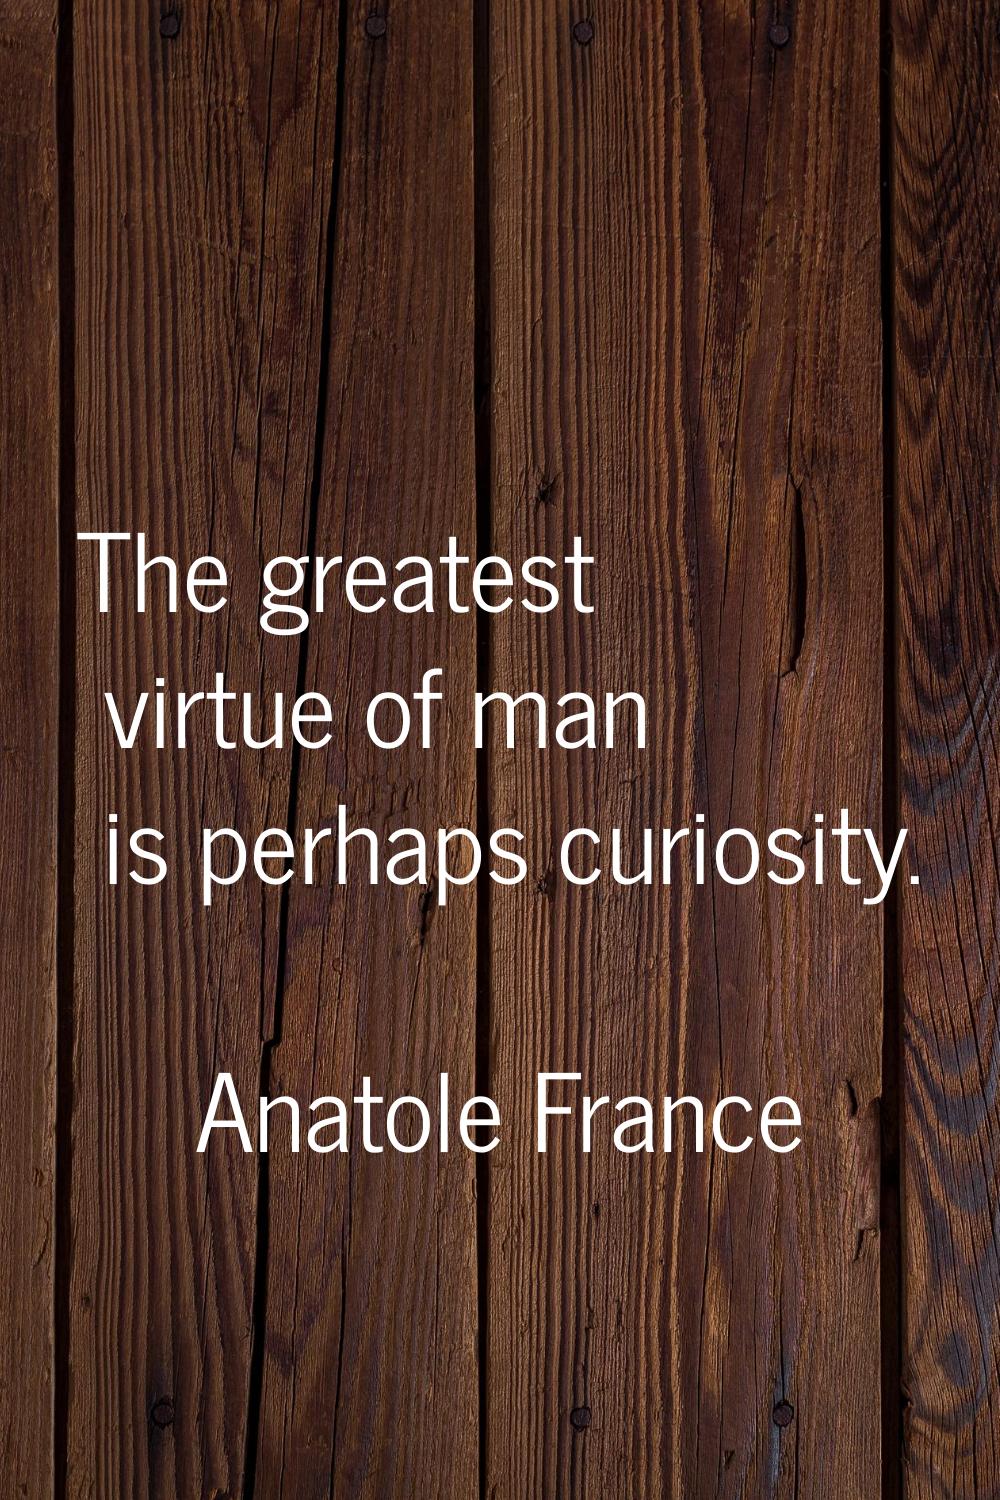 The greatest virtue of man is perhaps curiosity.